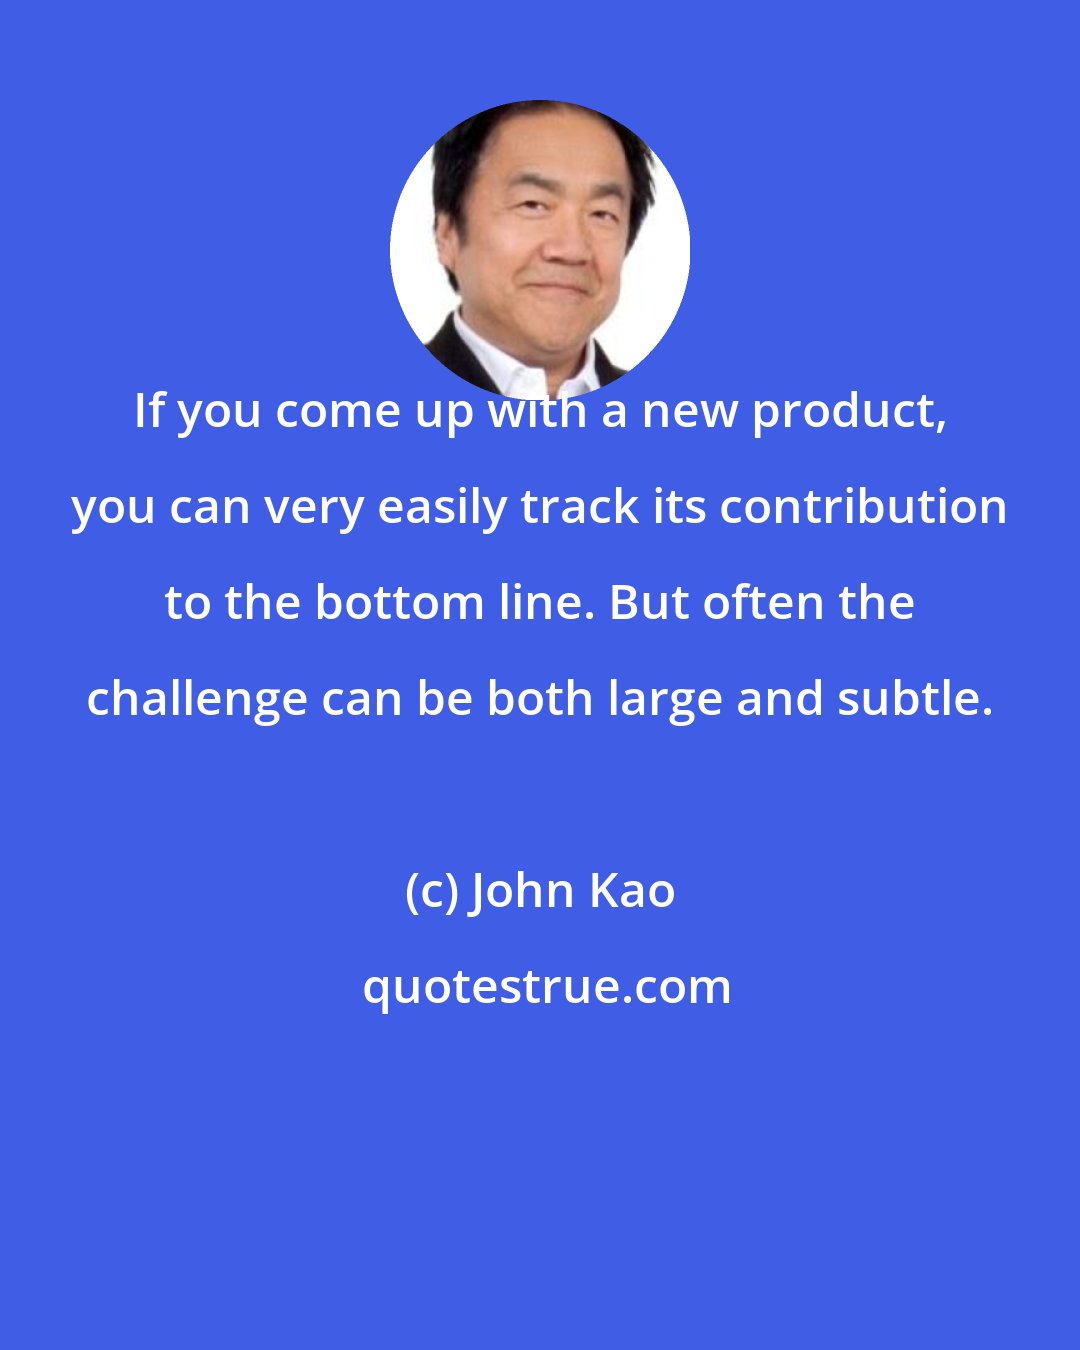 John Kao: If you come up with a new product, you can very easily track its contribution to the bottom line. But often the challenge can be both large and subtle.